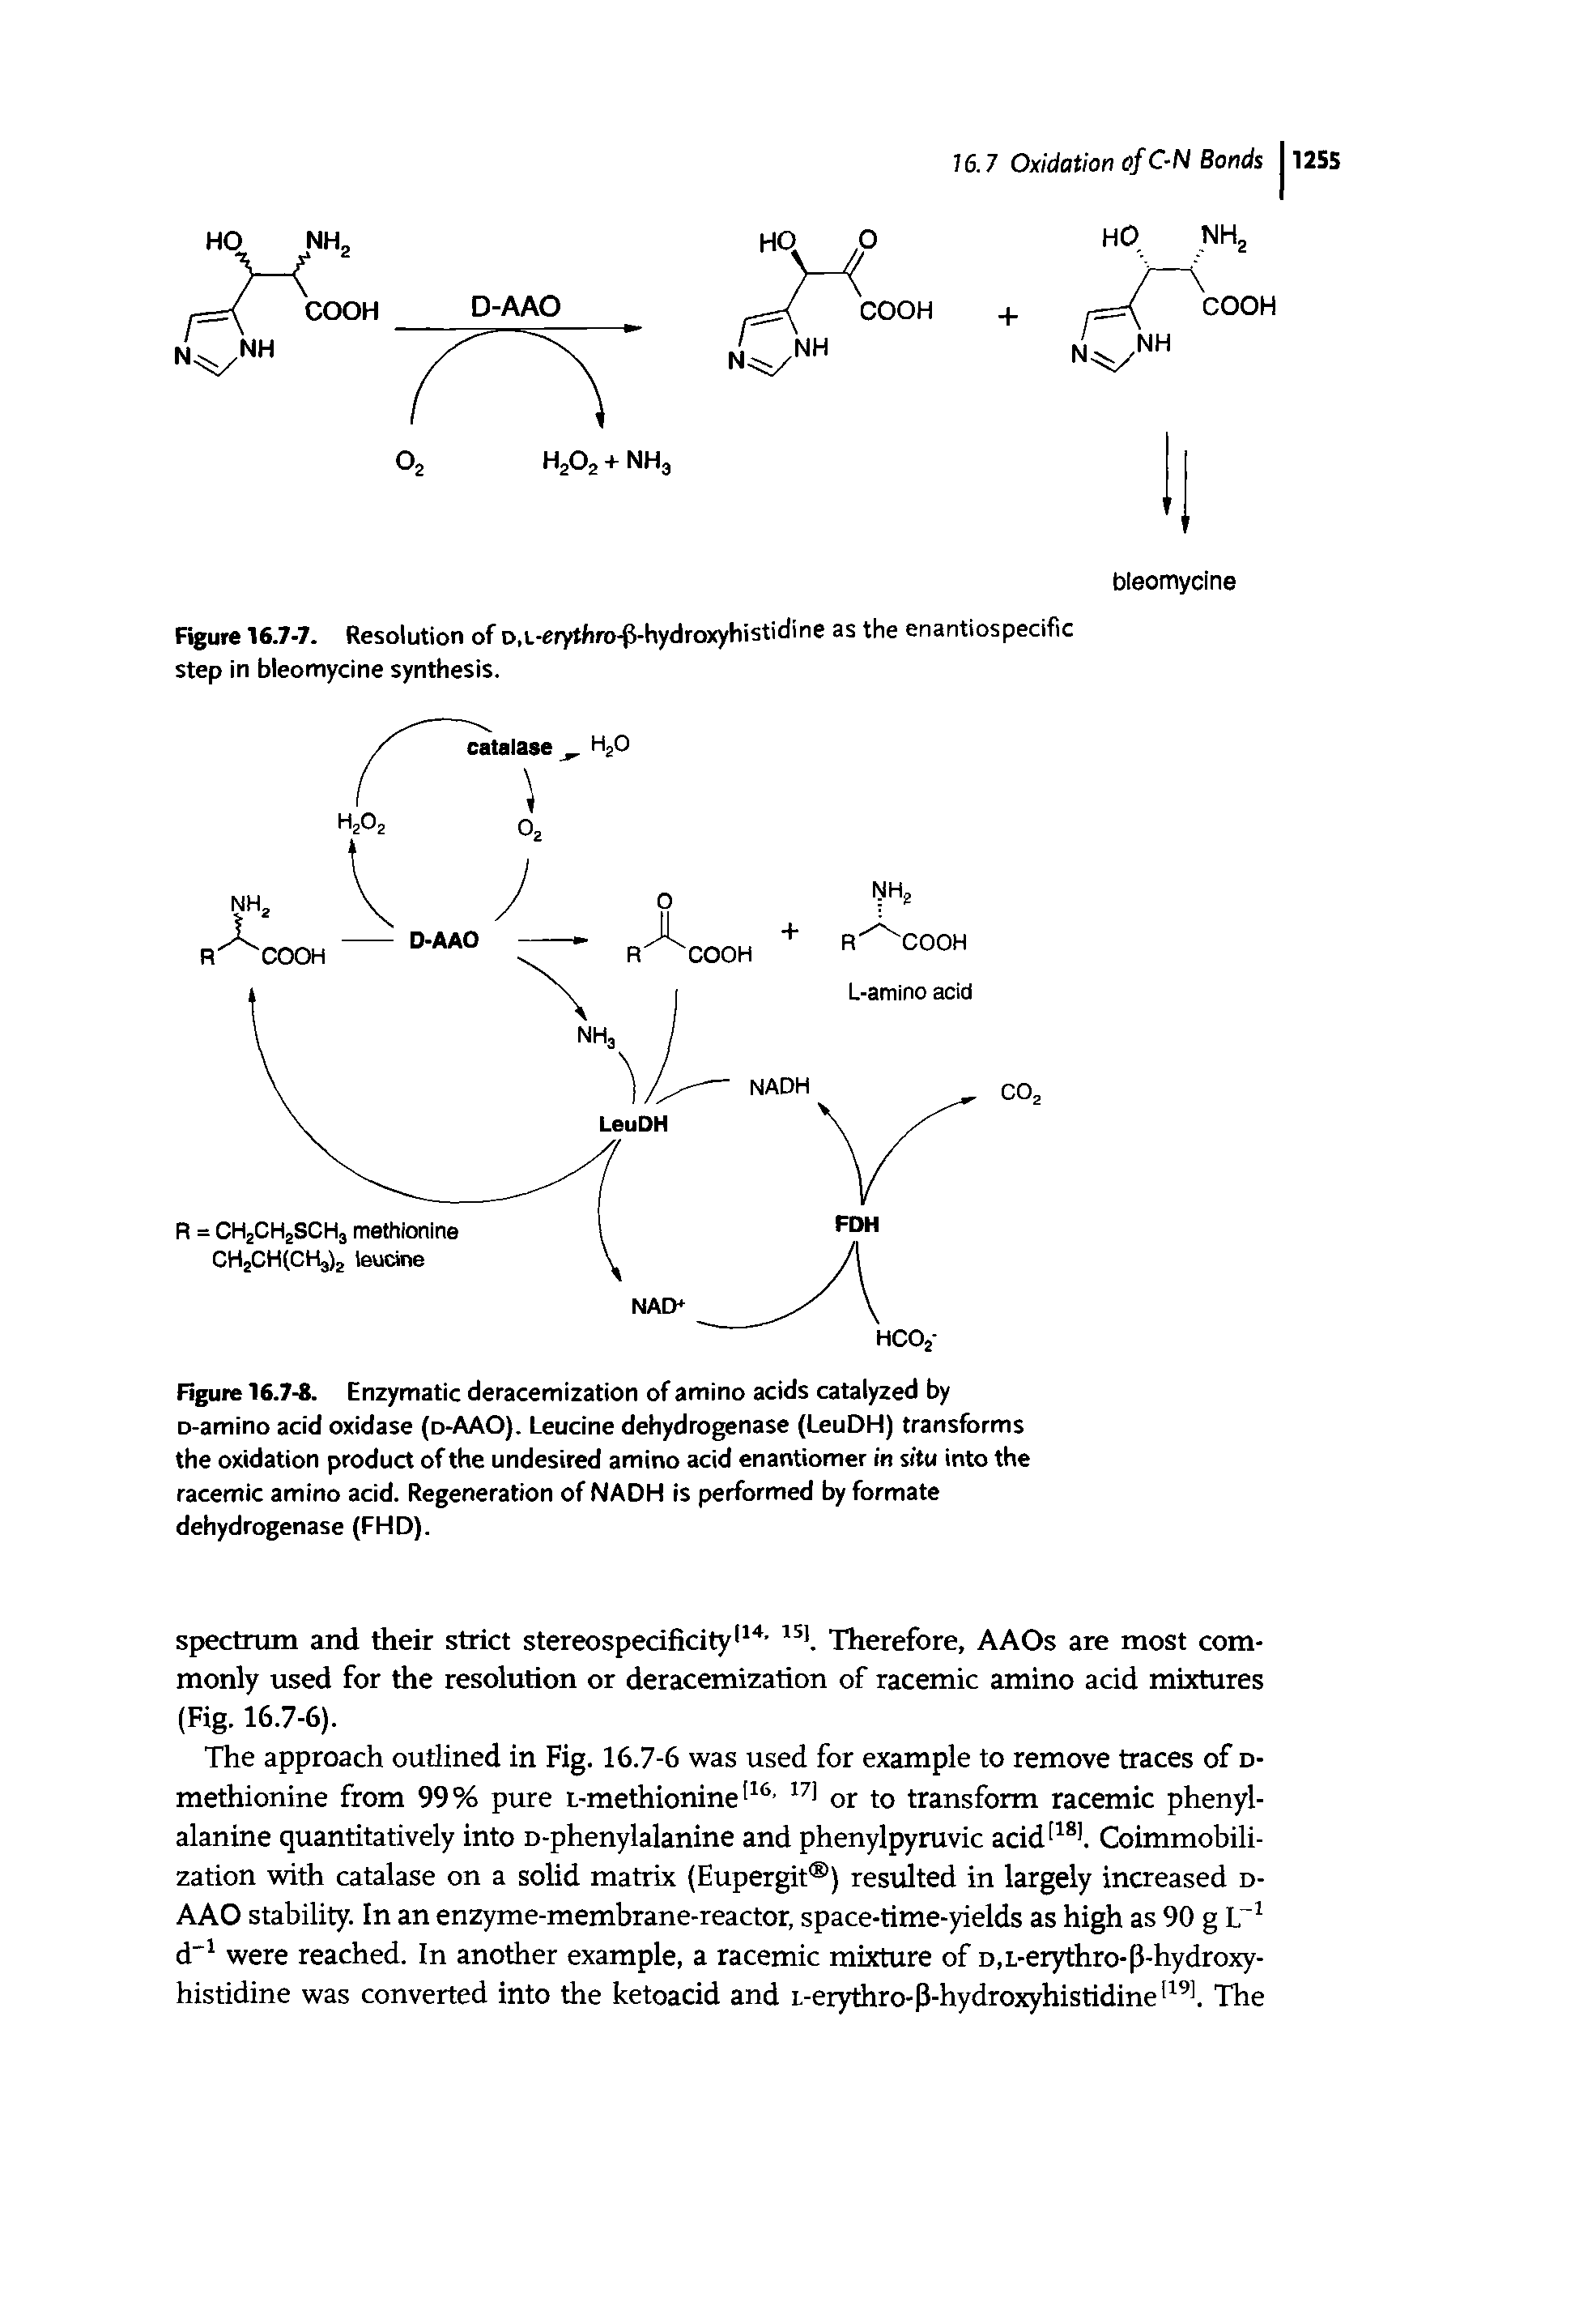 Figure 16.7-8. Enzymatic deracemization of amino acids catalyzed by D-amino acid oxidase (d-AAO). Leucine dehydrogenase (LeuDH) transforms the oxidation product of the undesired amino acid enantiomer in situ into the racemic amino acid. Regeneration of NADH is performed by formate dehydrogenase (FHD).